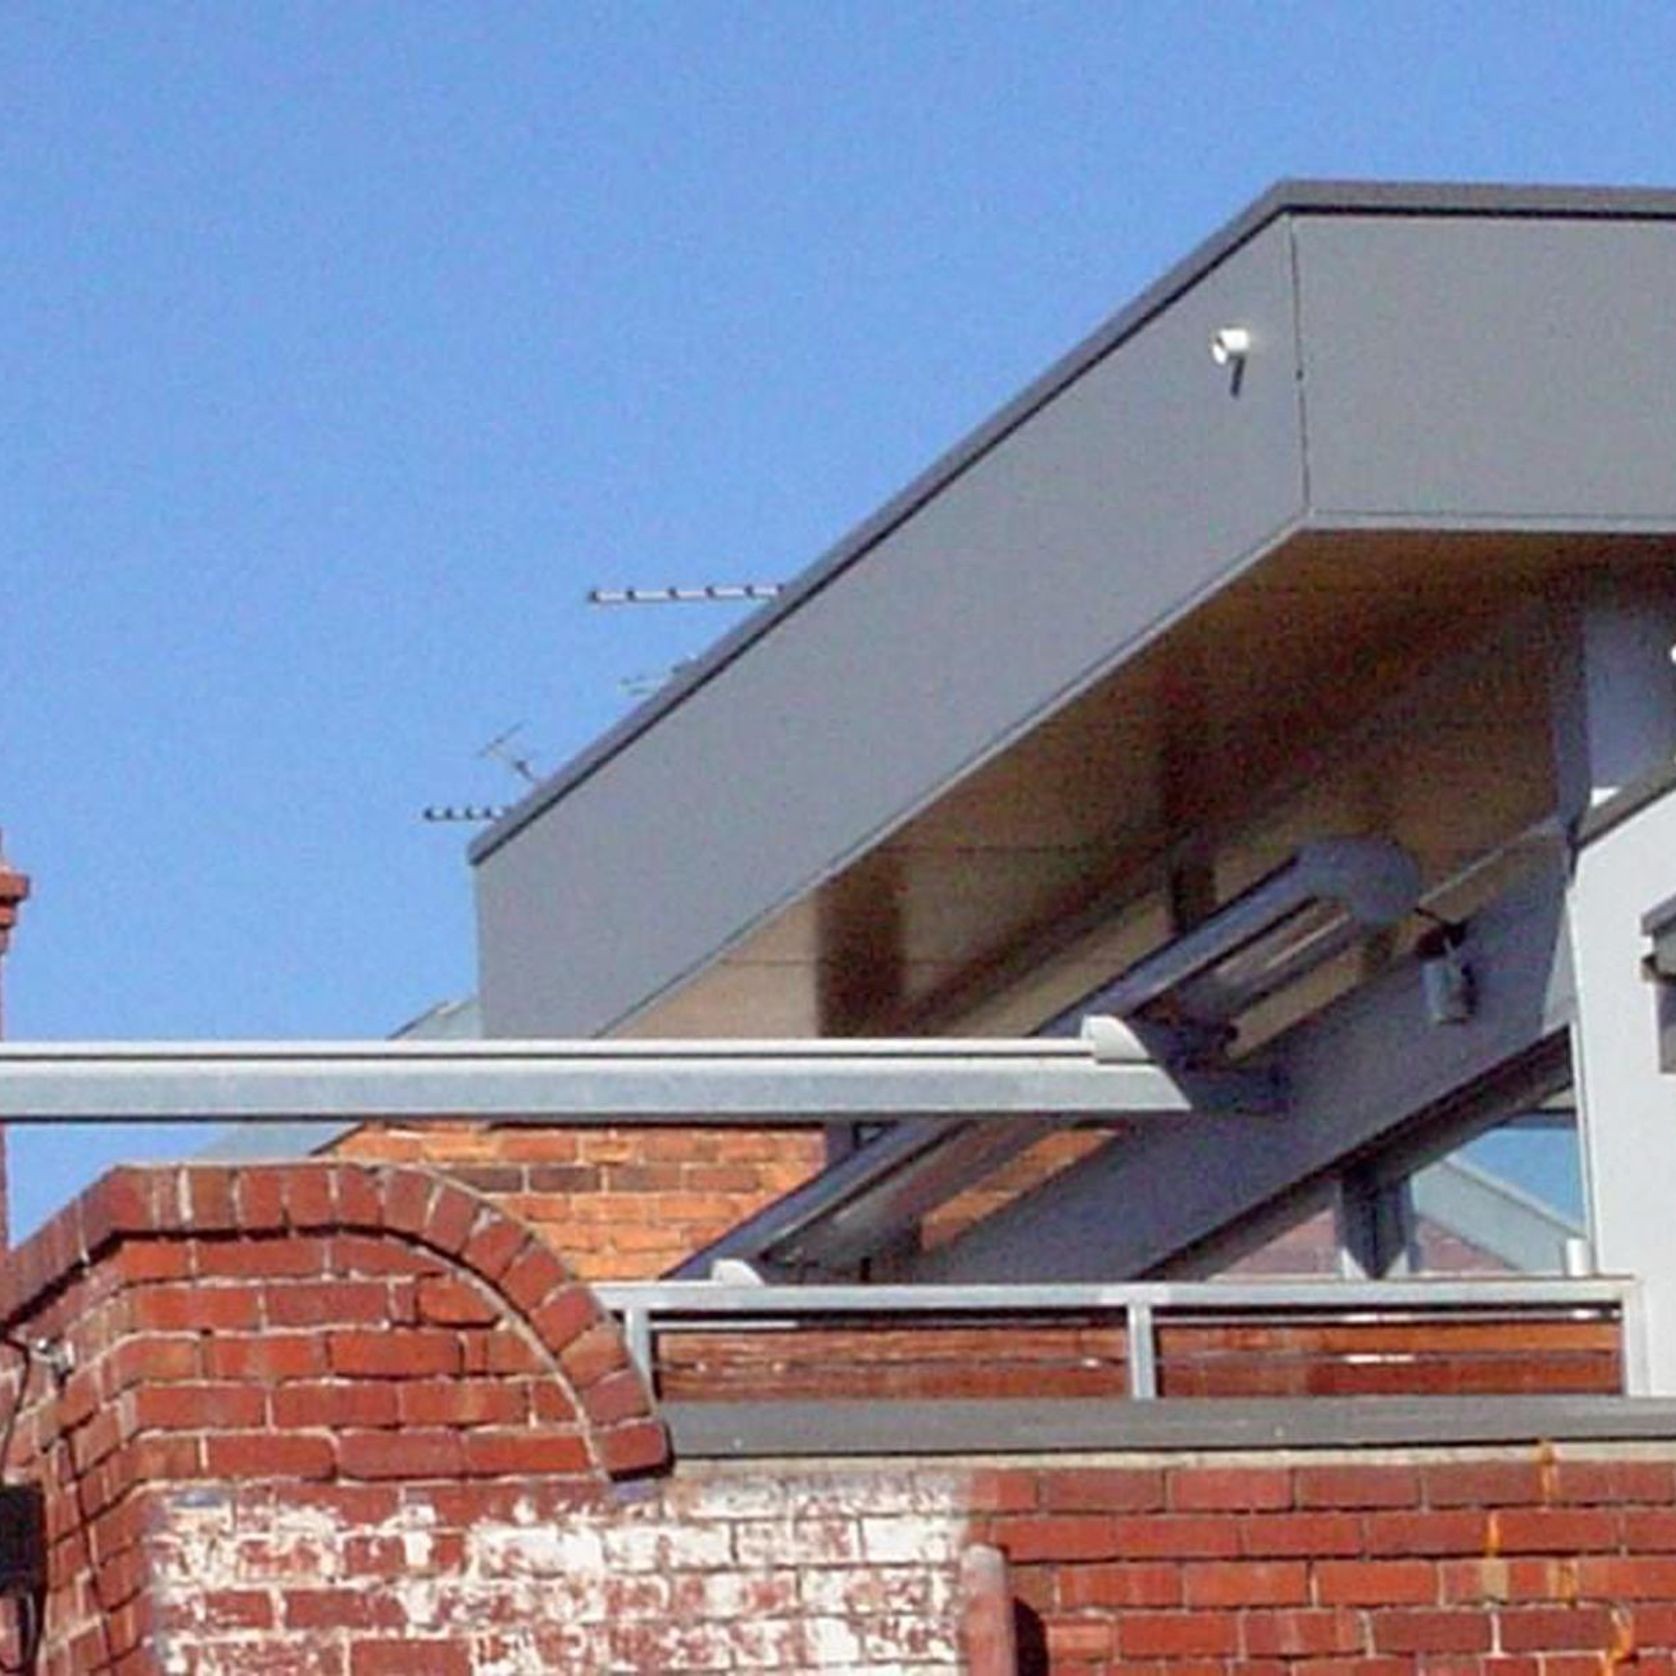 W7 Conservatory Awning (Cantilever Edge) | Warema gallery detail image